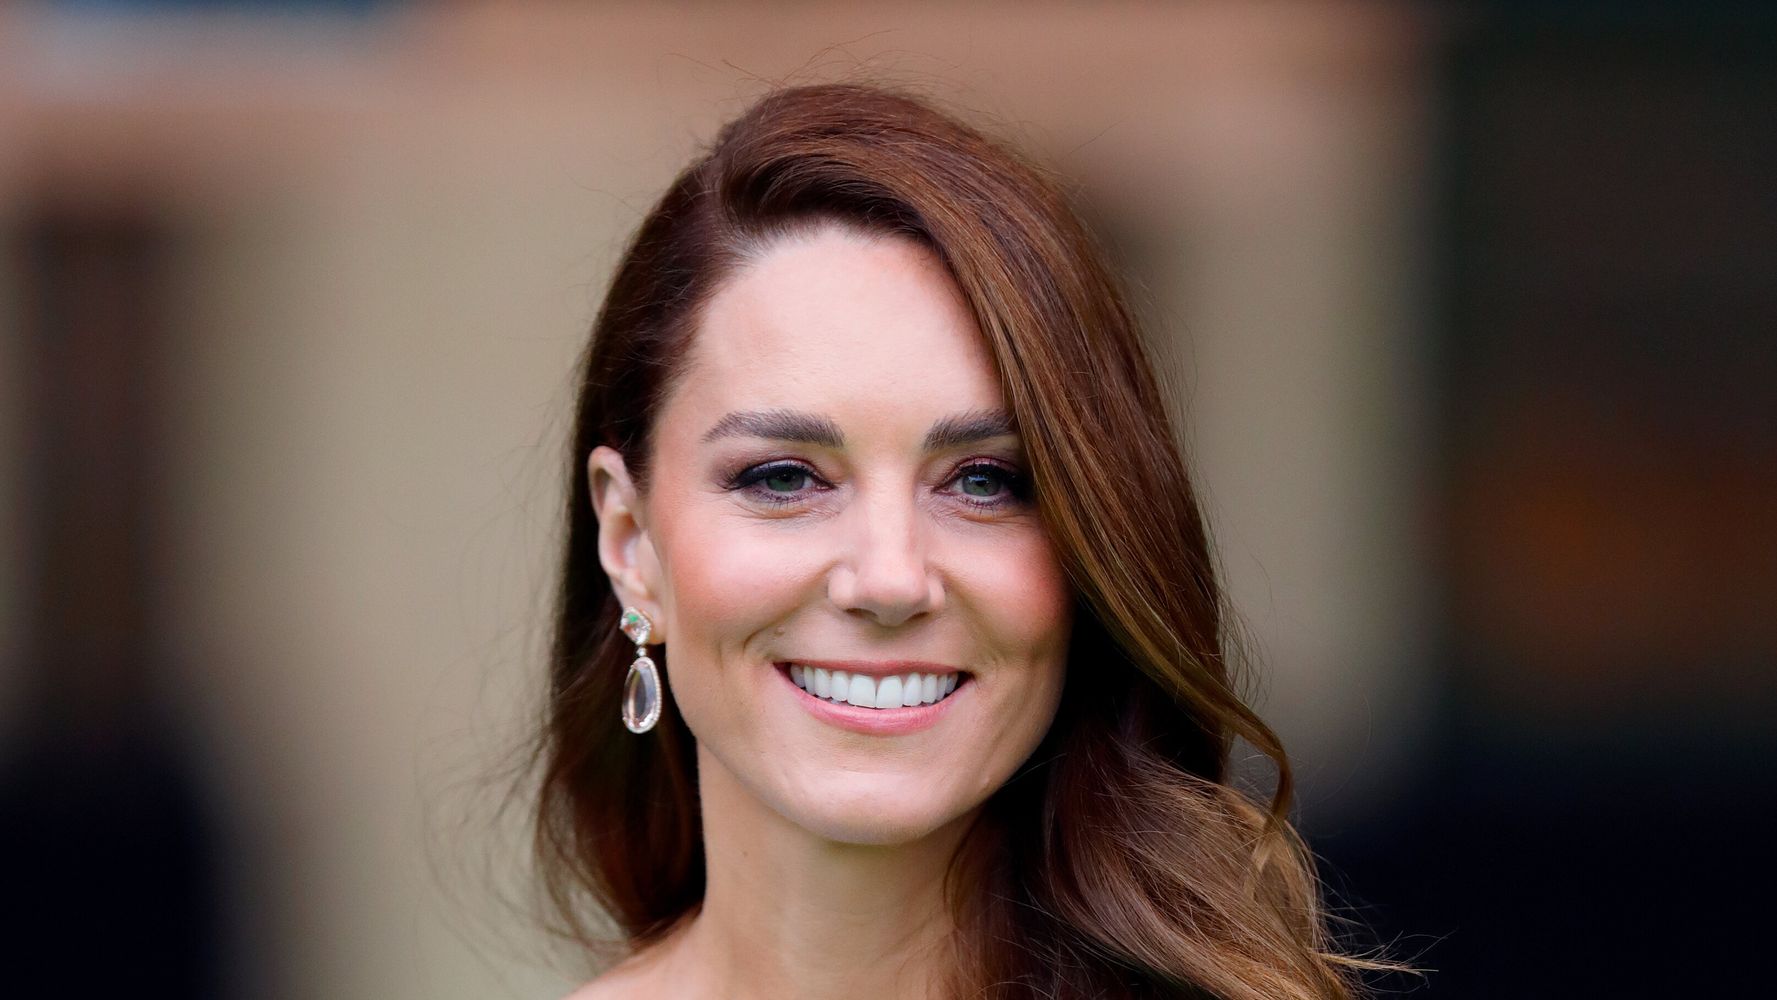 Kate Middleton Makes Fashion Statement With Recycled Gown From 2011 - HuffPost